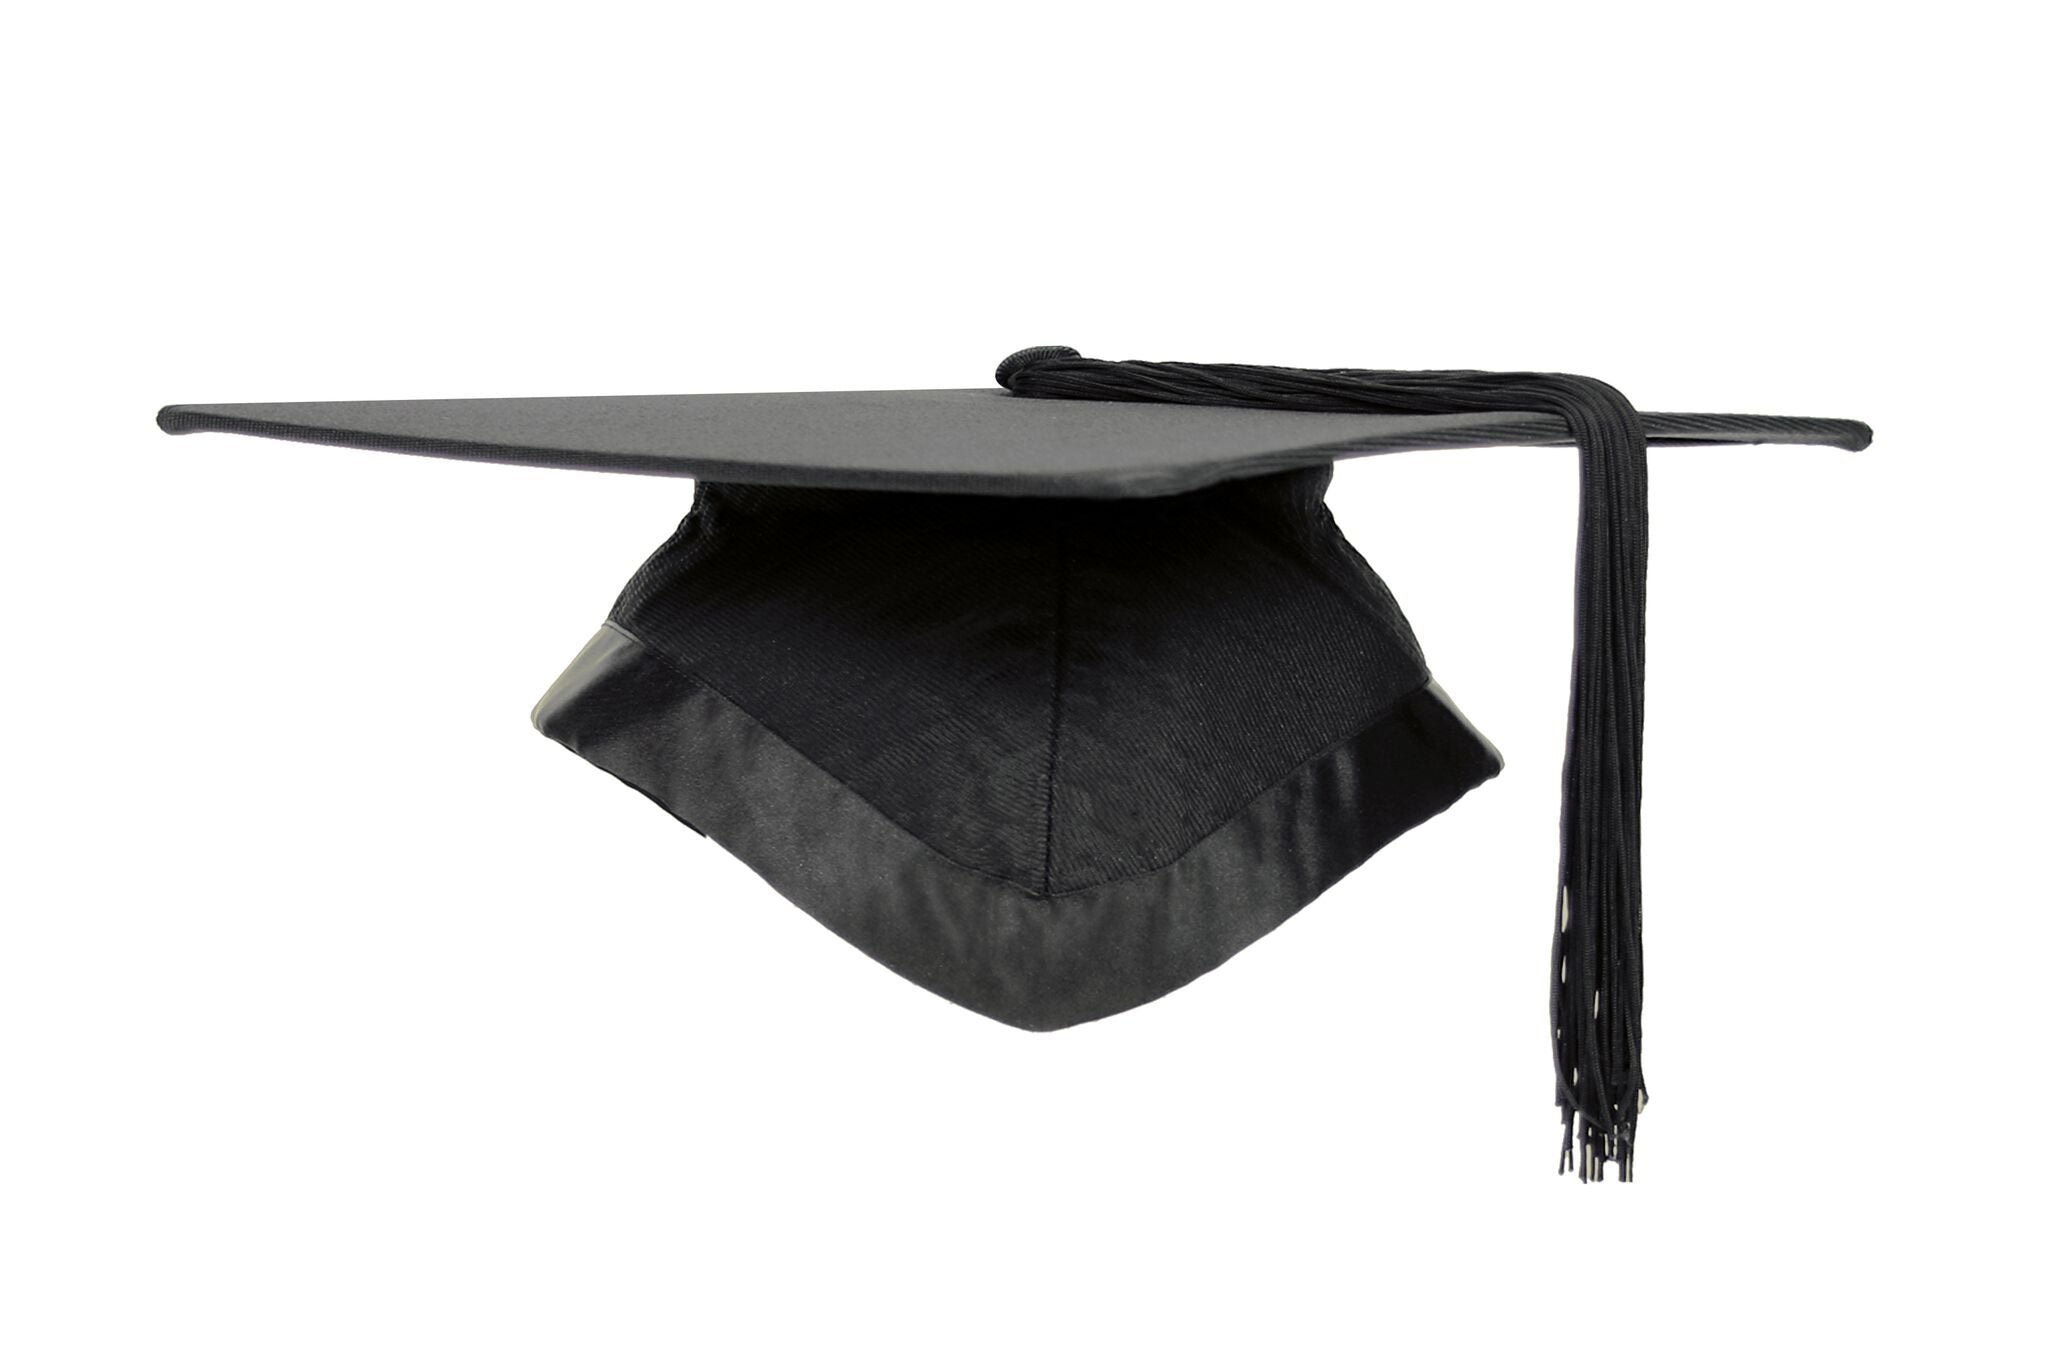 Classic Masters Graduation Mortarboard & Gown - Graduation Gowns UK